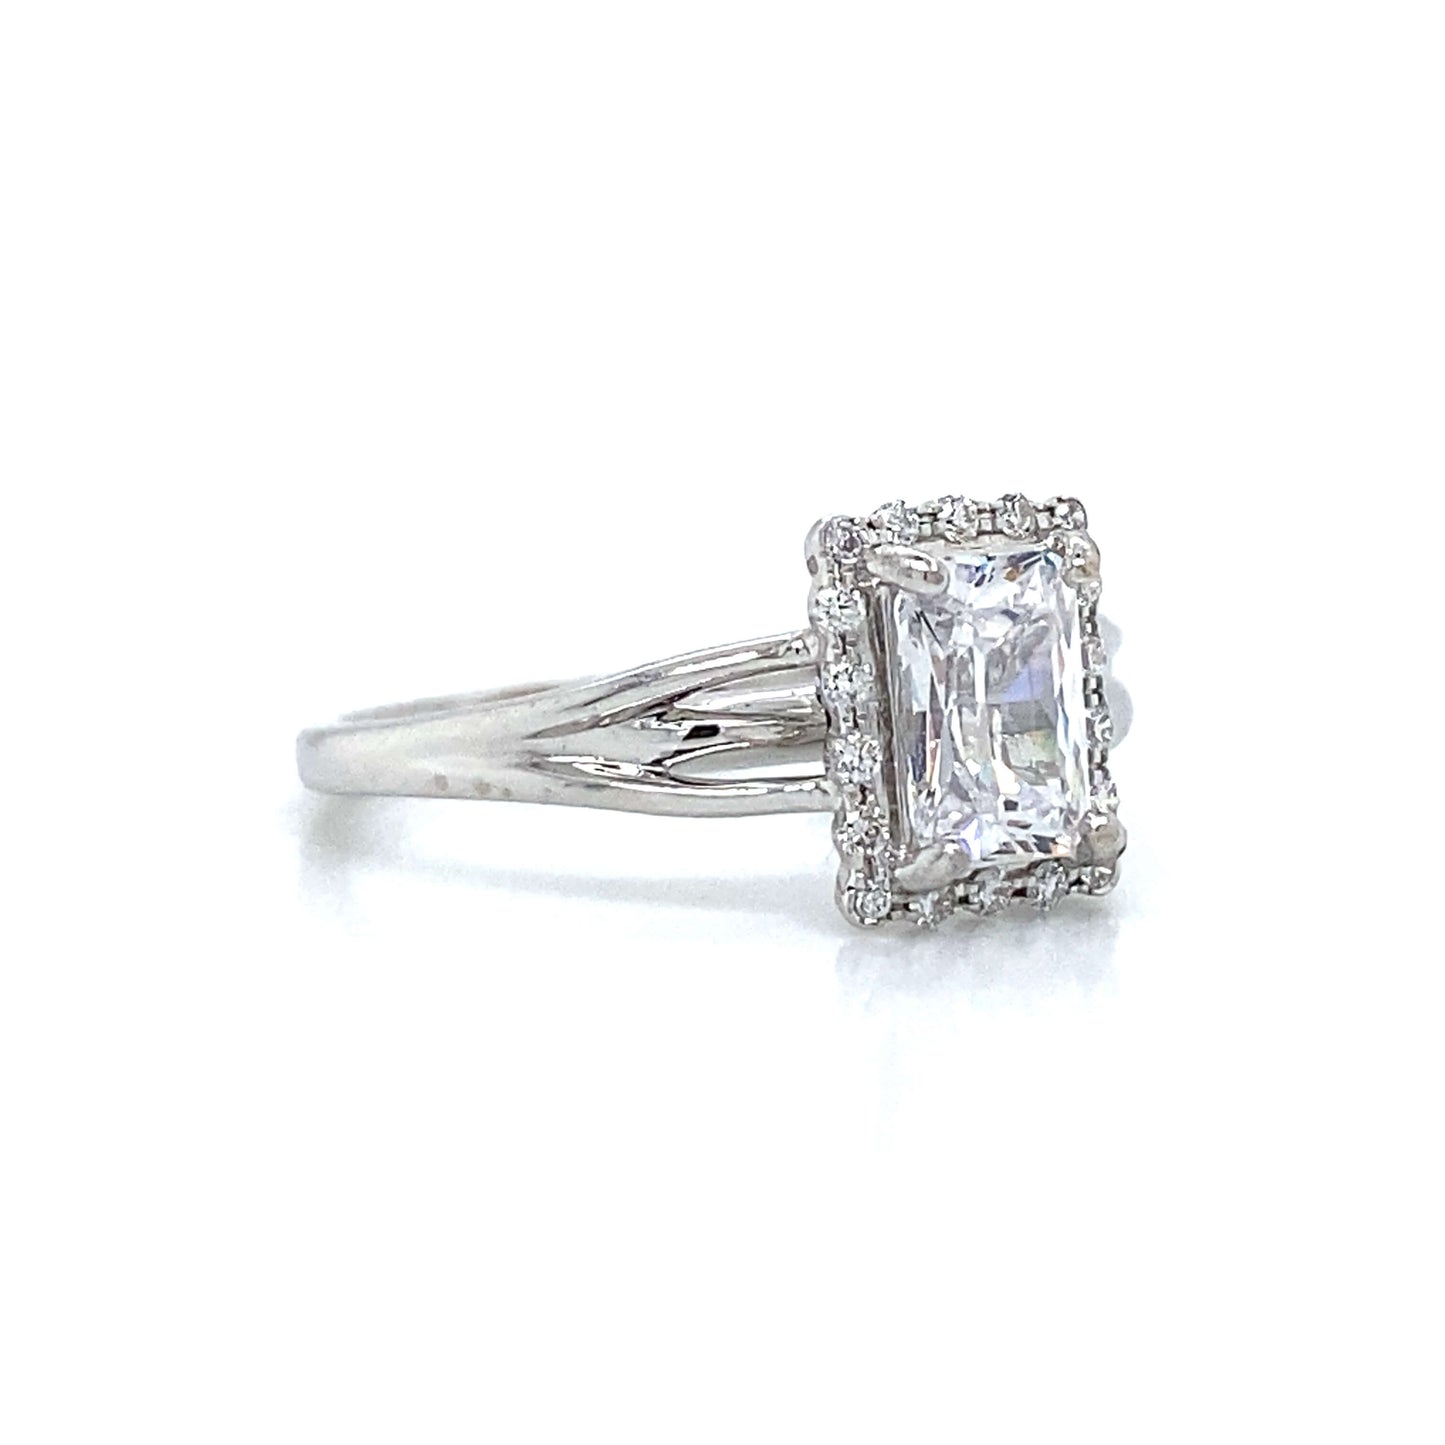 Verragio Square Halo Pave Engagement Ring in 18K White Gold